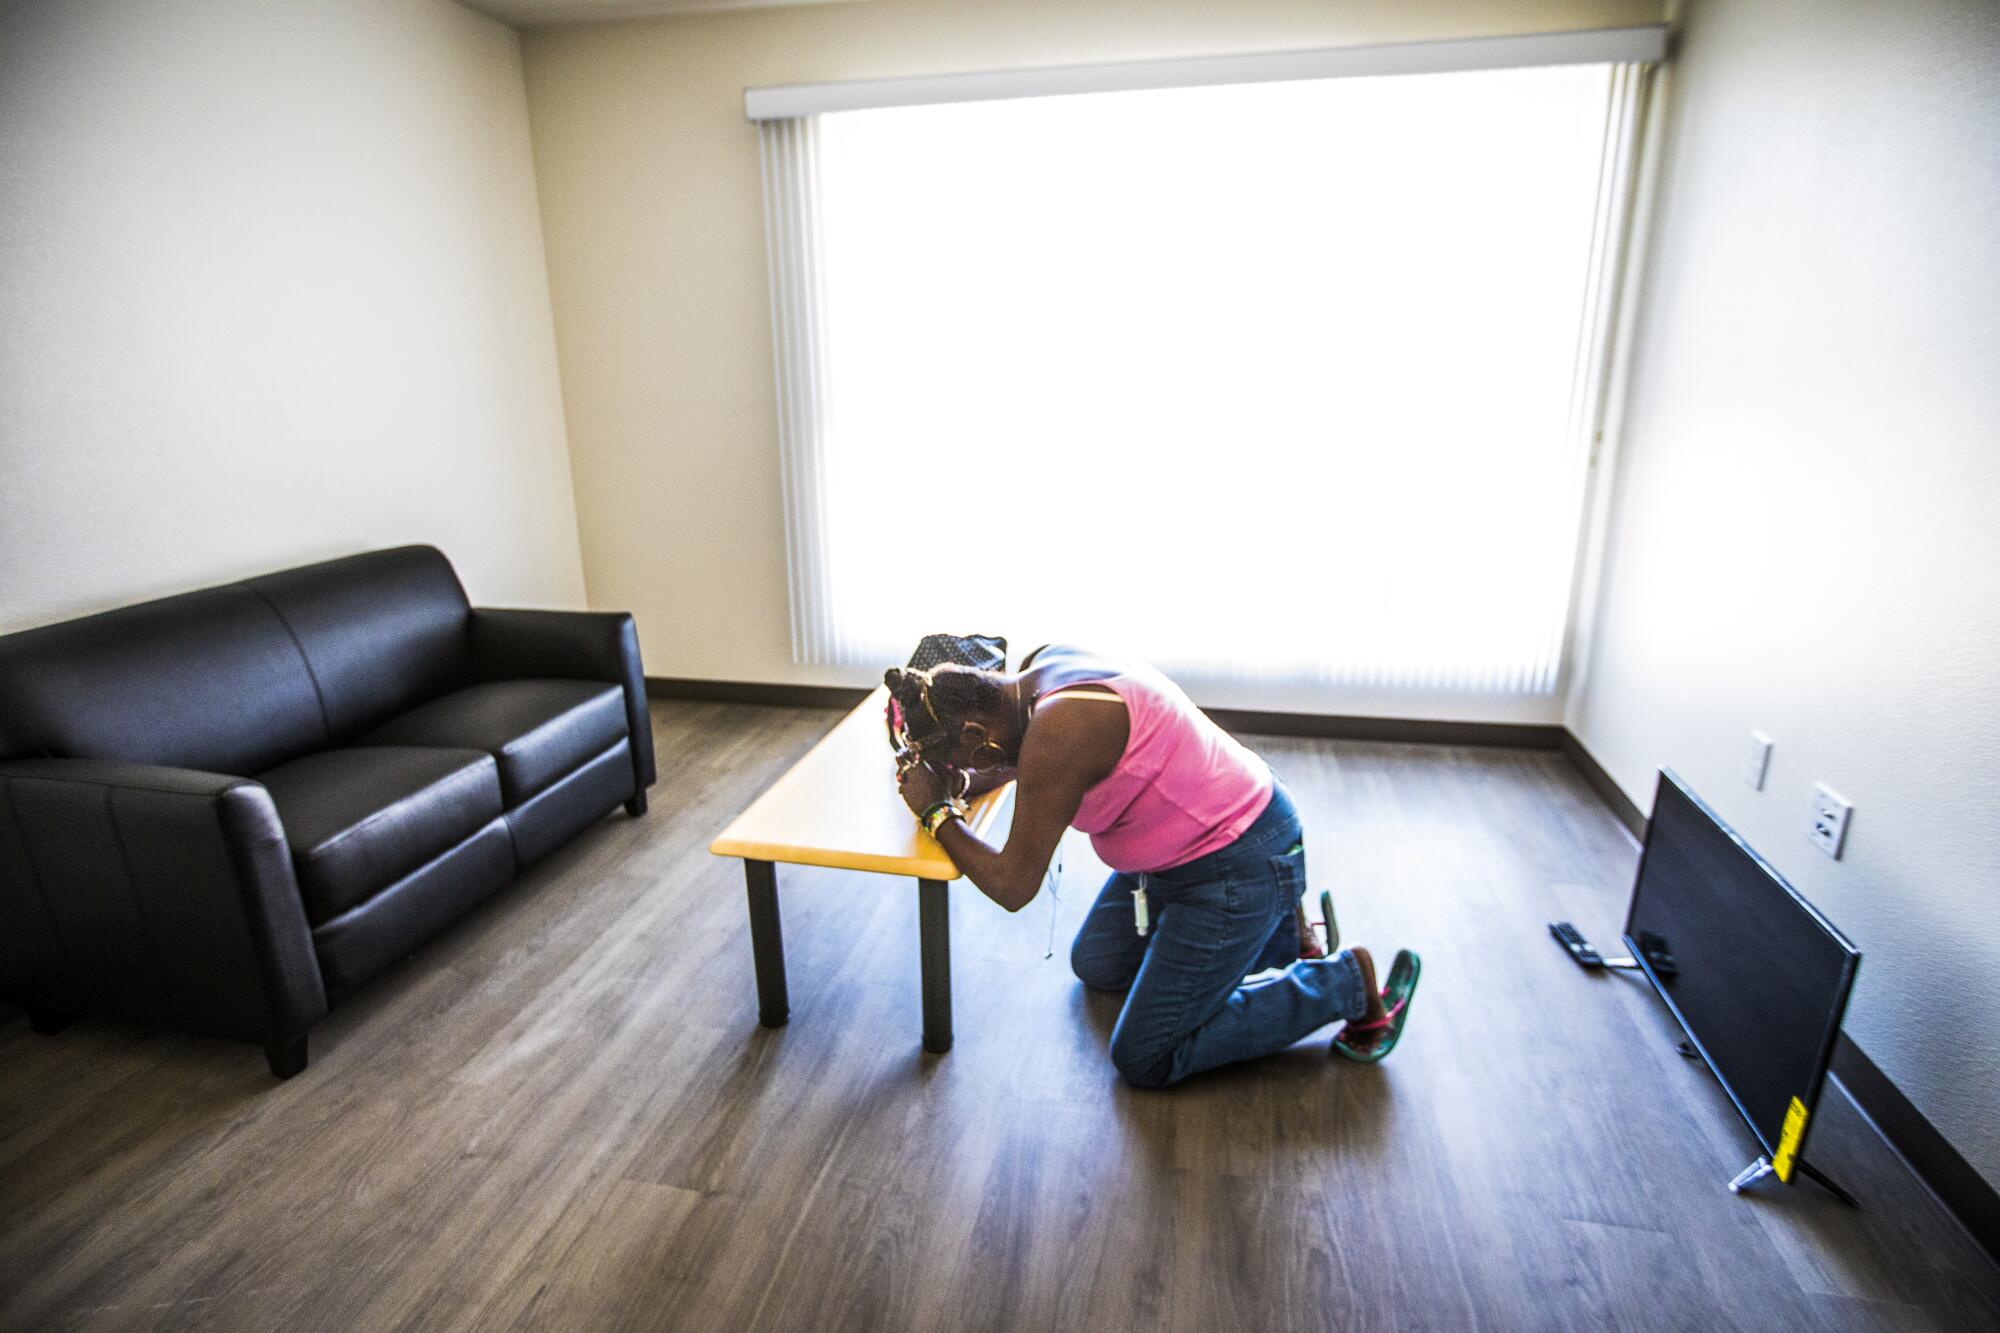 A woman prays inside a sparsely furnished apartment